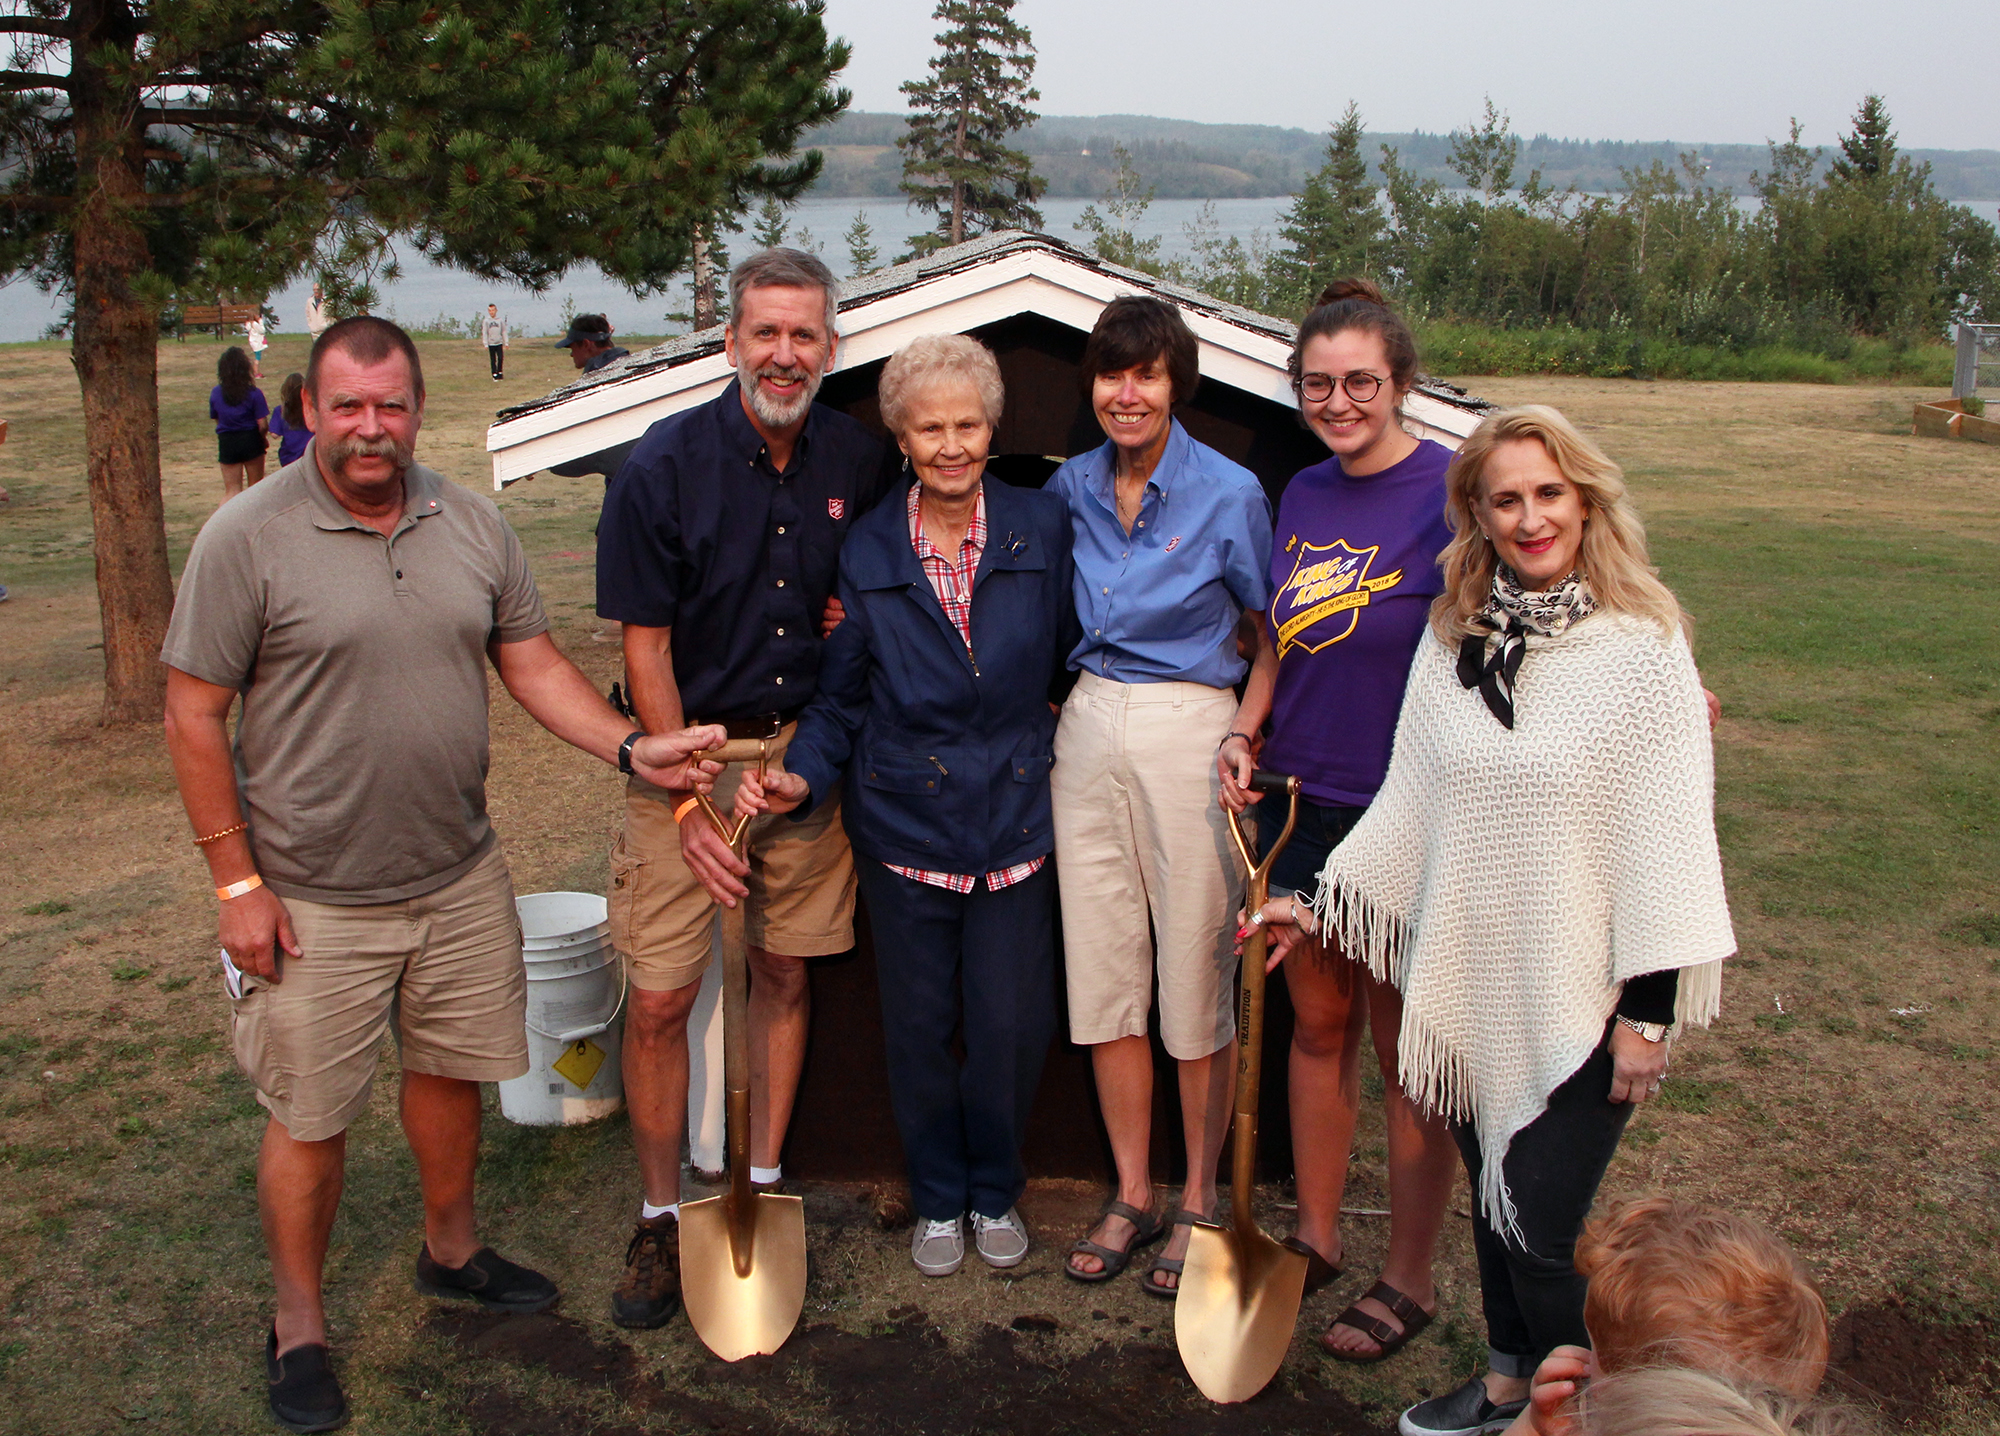 Time capsule ceremony at Pine Lake Camp's 60th anniversary celebration.